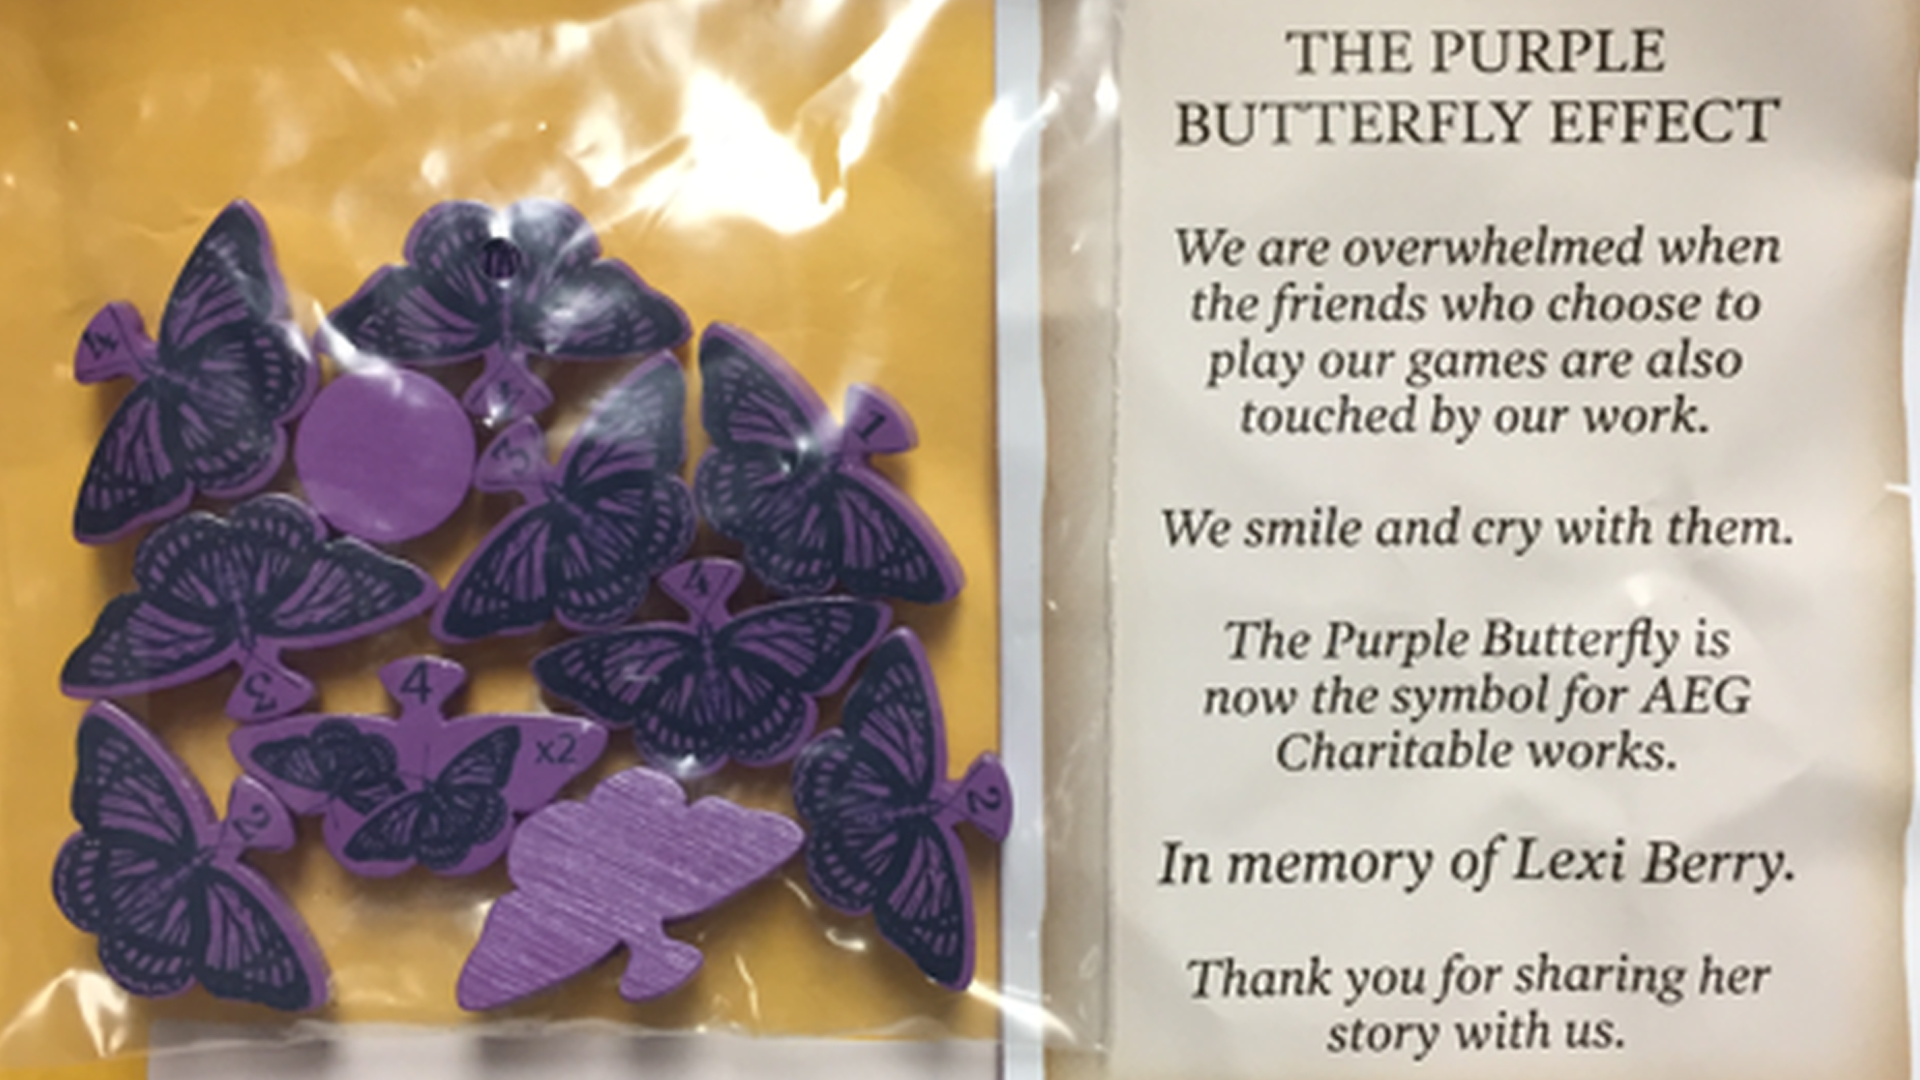 Image for Wingspan creator’s new game Mariposas receives purple butterflies pack in memory of fan’s late daughter